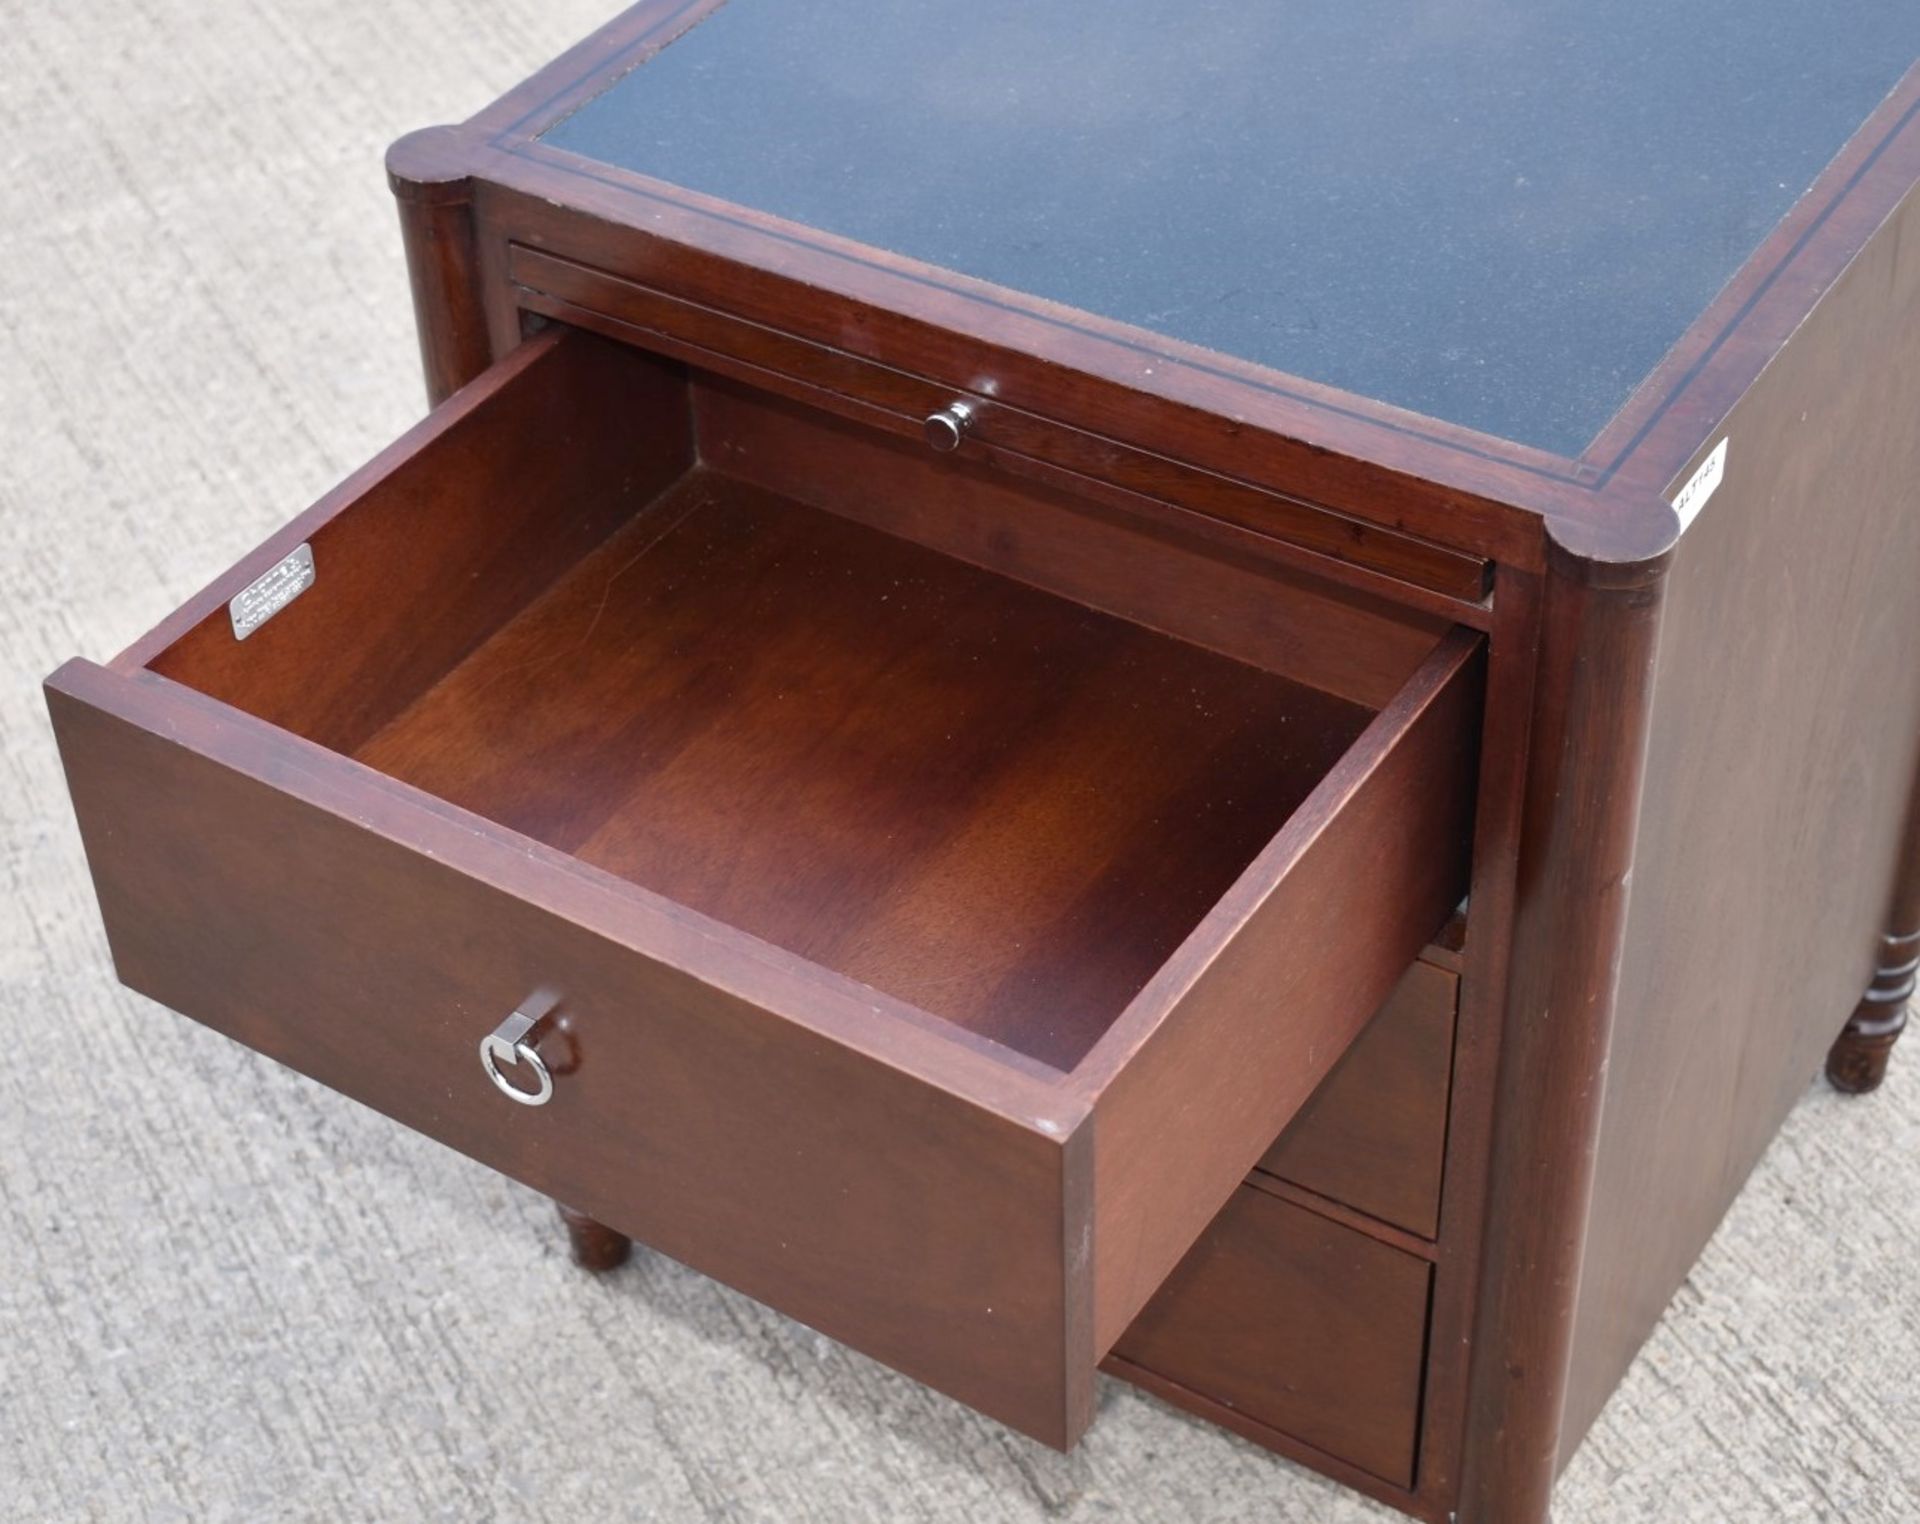 1 x CHANNELS Classically Styled Designer Solid Wood End Table with Pull-Out Tray, 1-Drawer Storage - Image 4 of 5